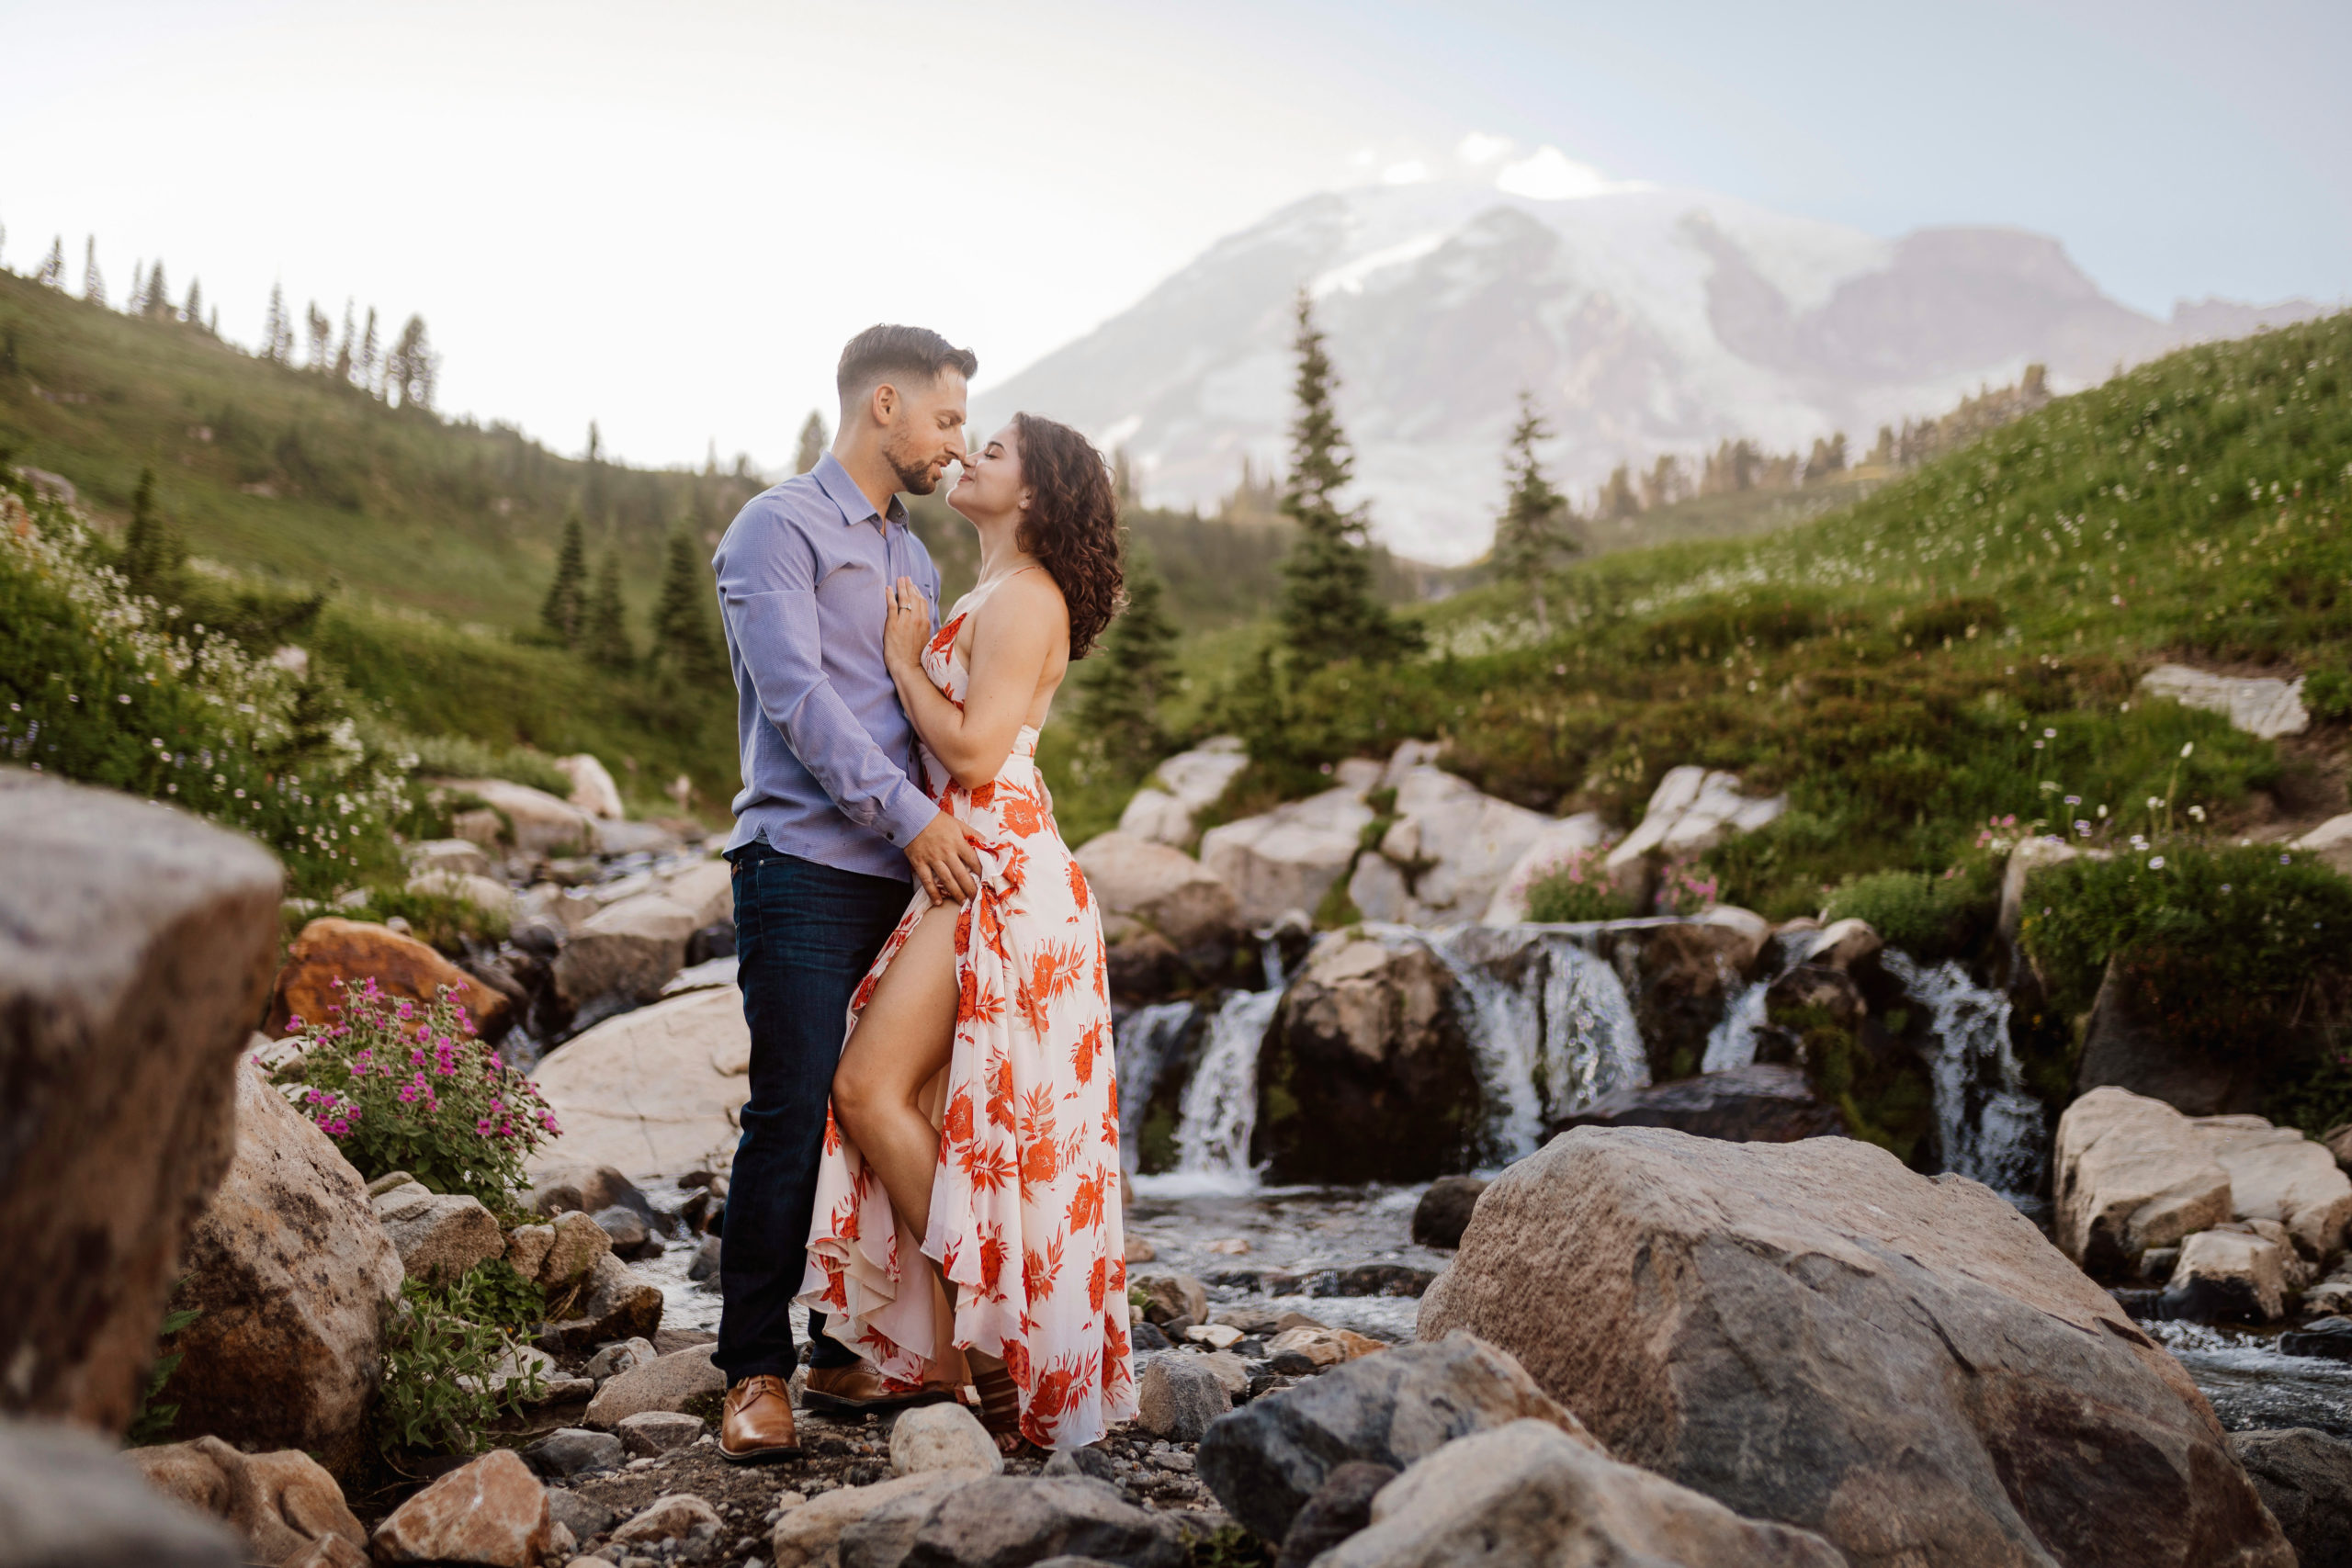 Couple embracing in front of Mt. Rainier.